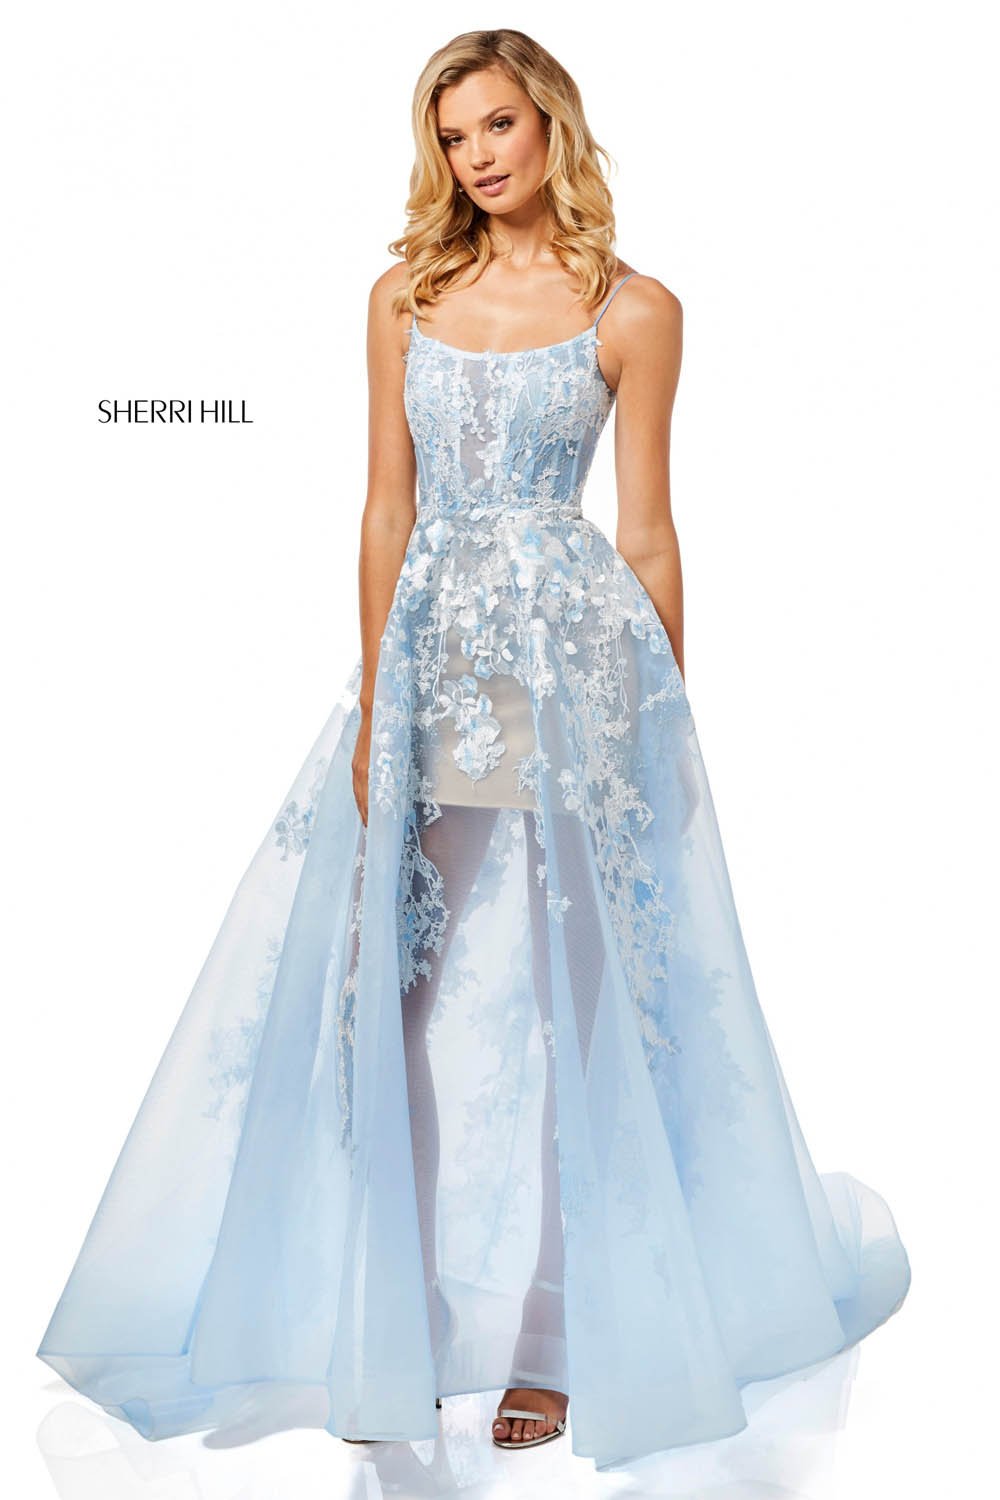 Sherri Hill 52448 dress images in these colors: Yellow, Light Blue, Coral, Light Green.